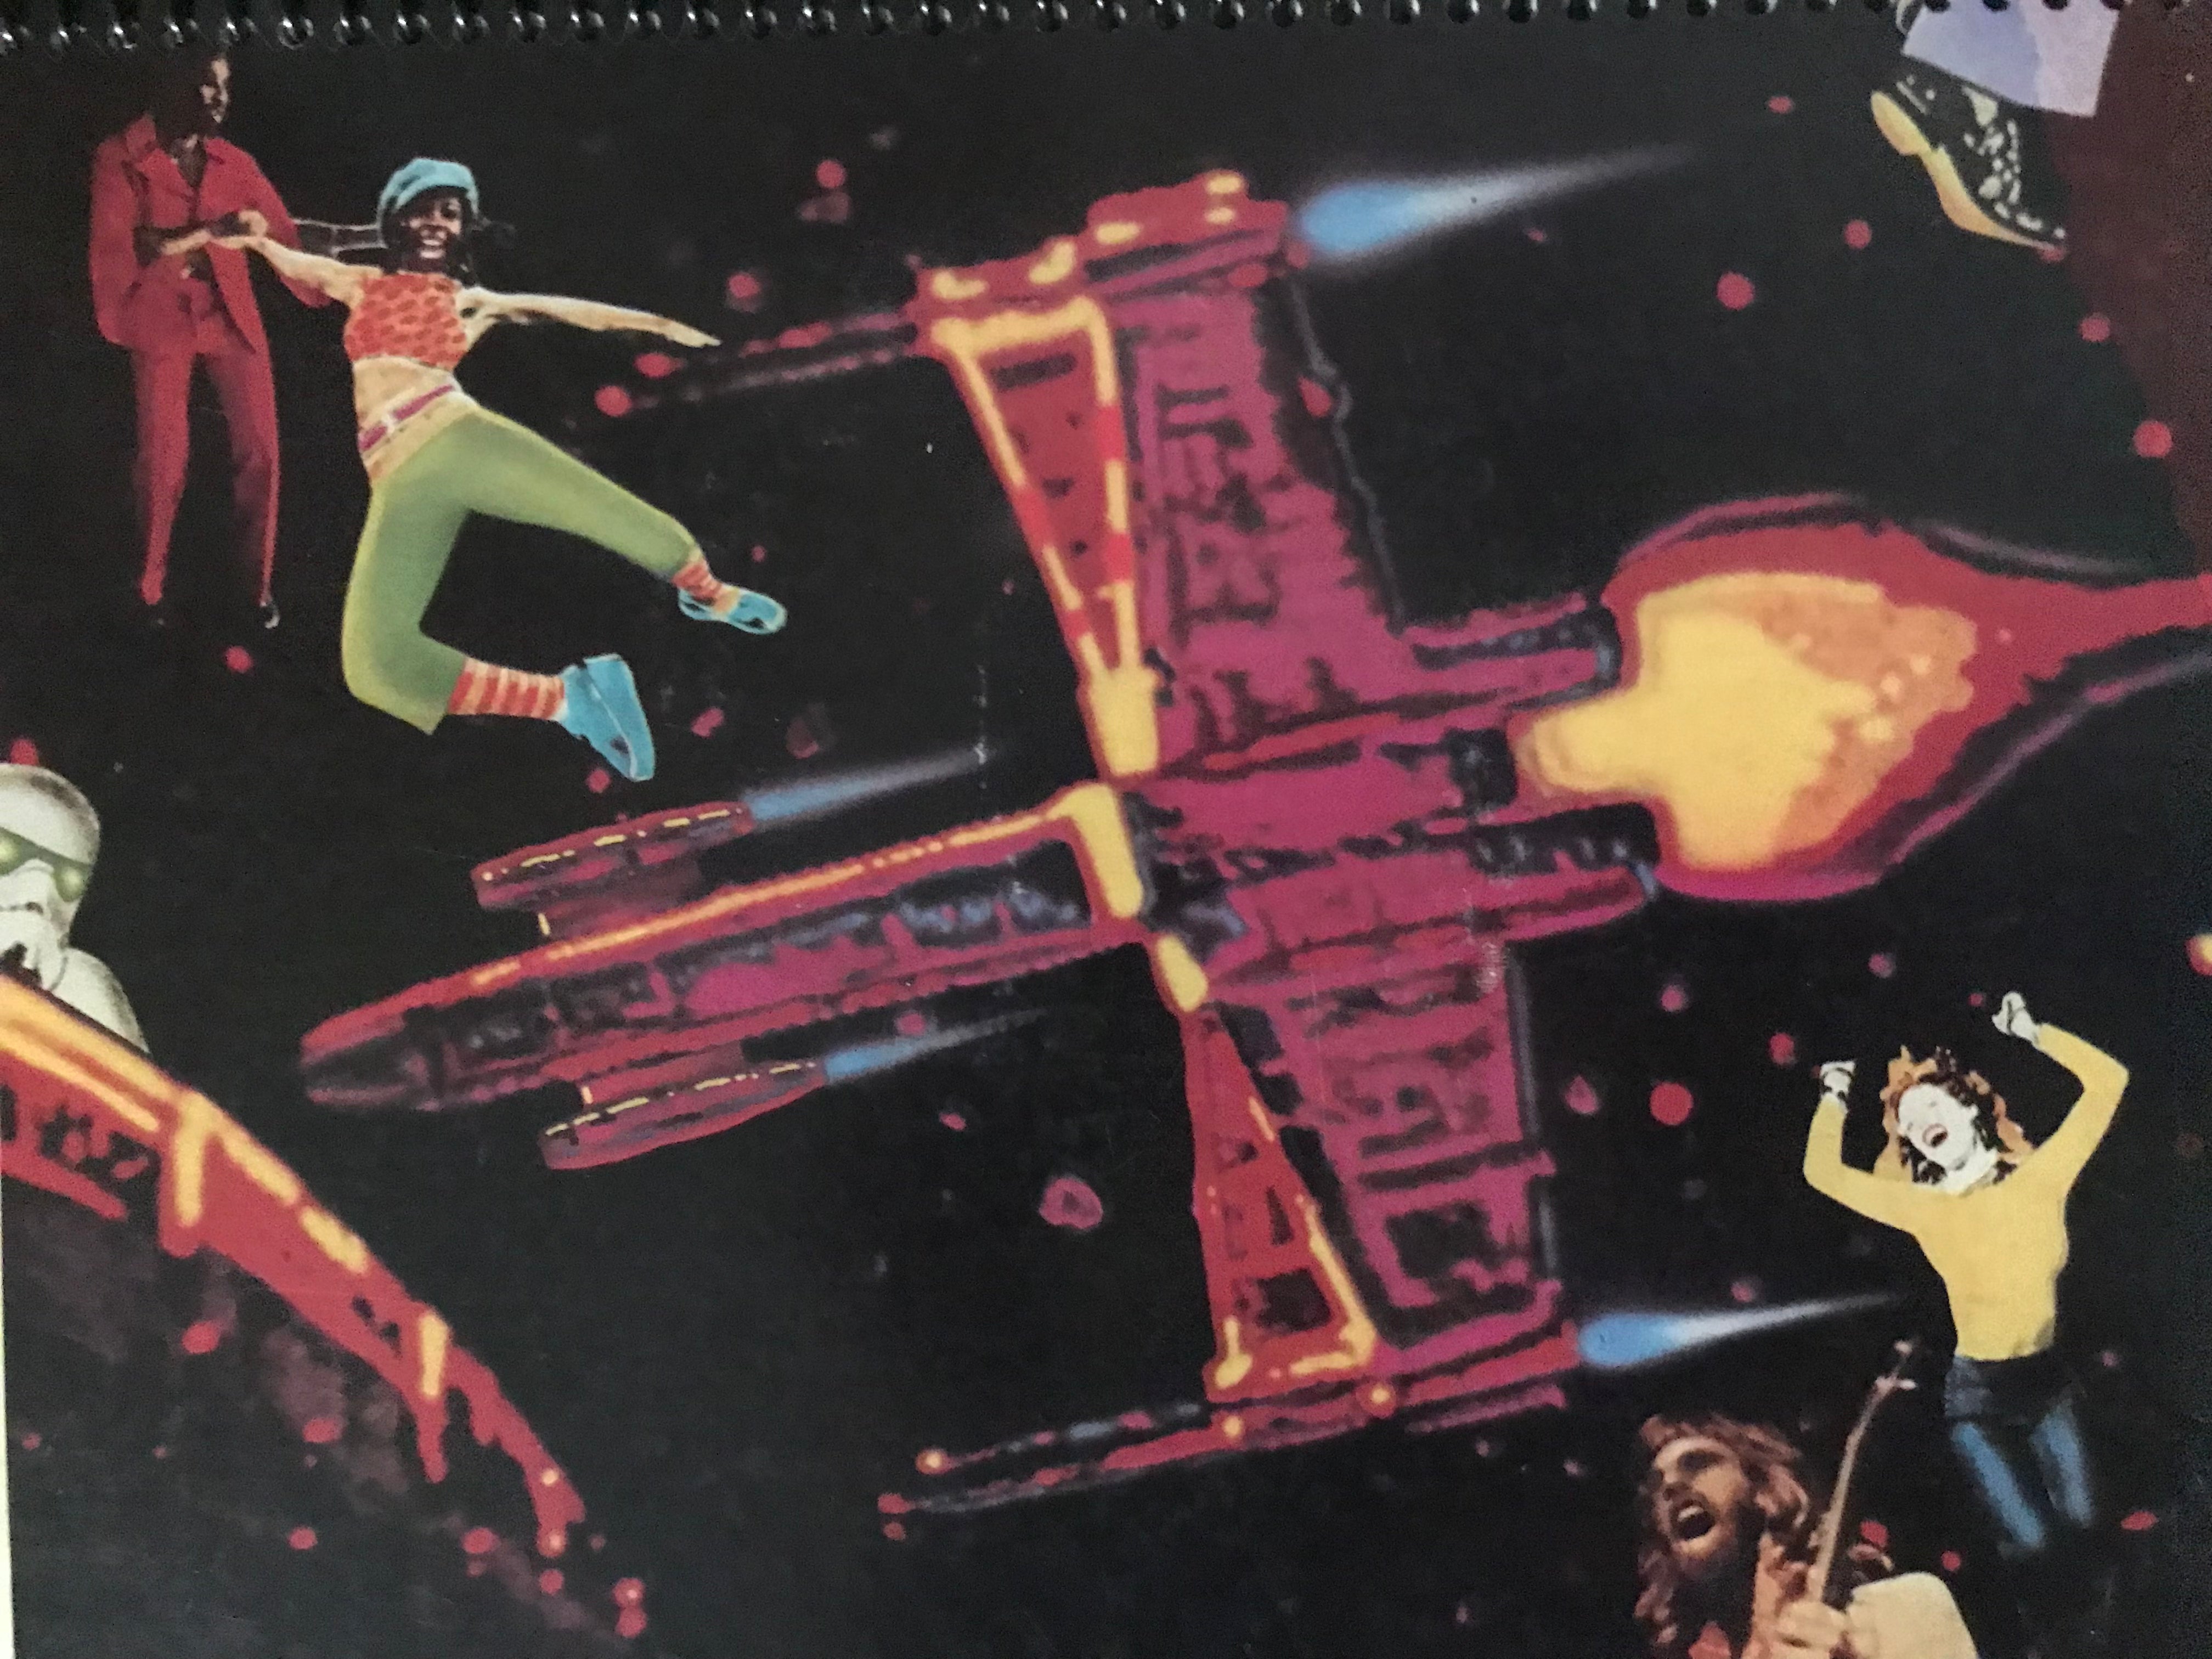 Rock of the 70s Album Cover Notebook